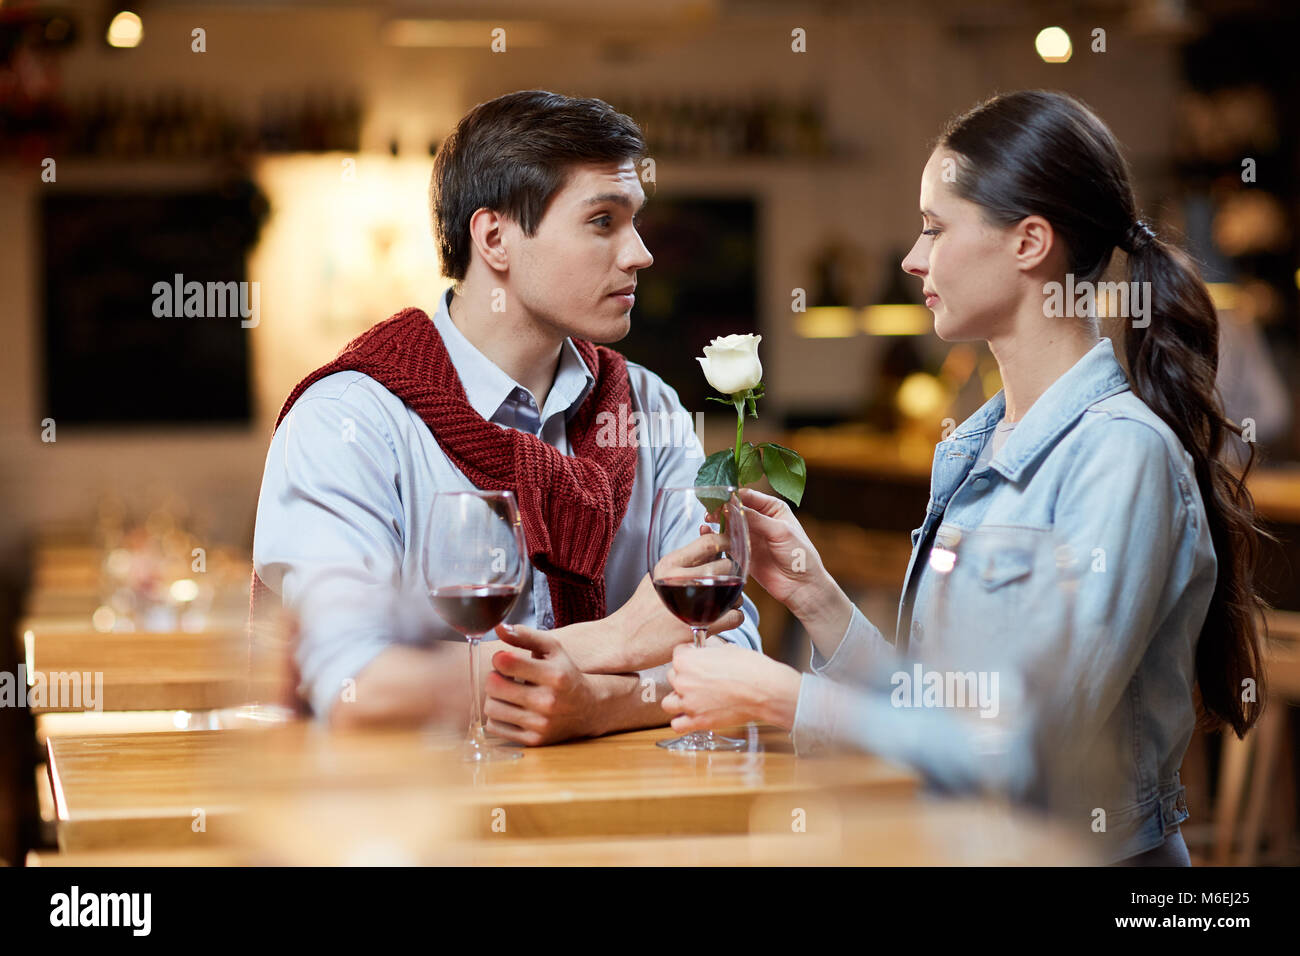 Date at restaurant Stock Photo